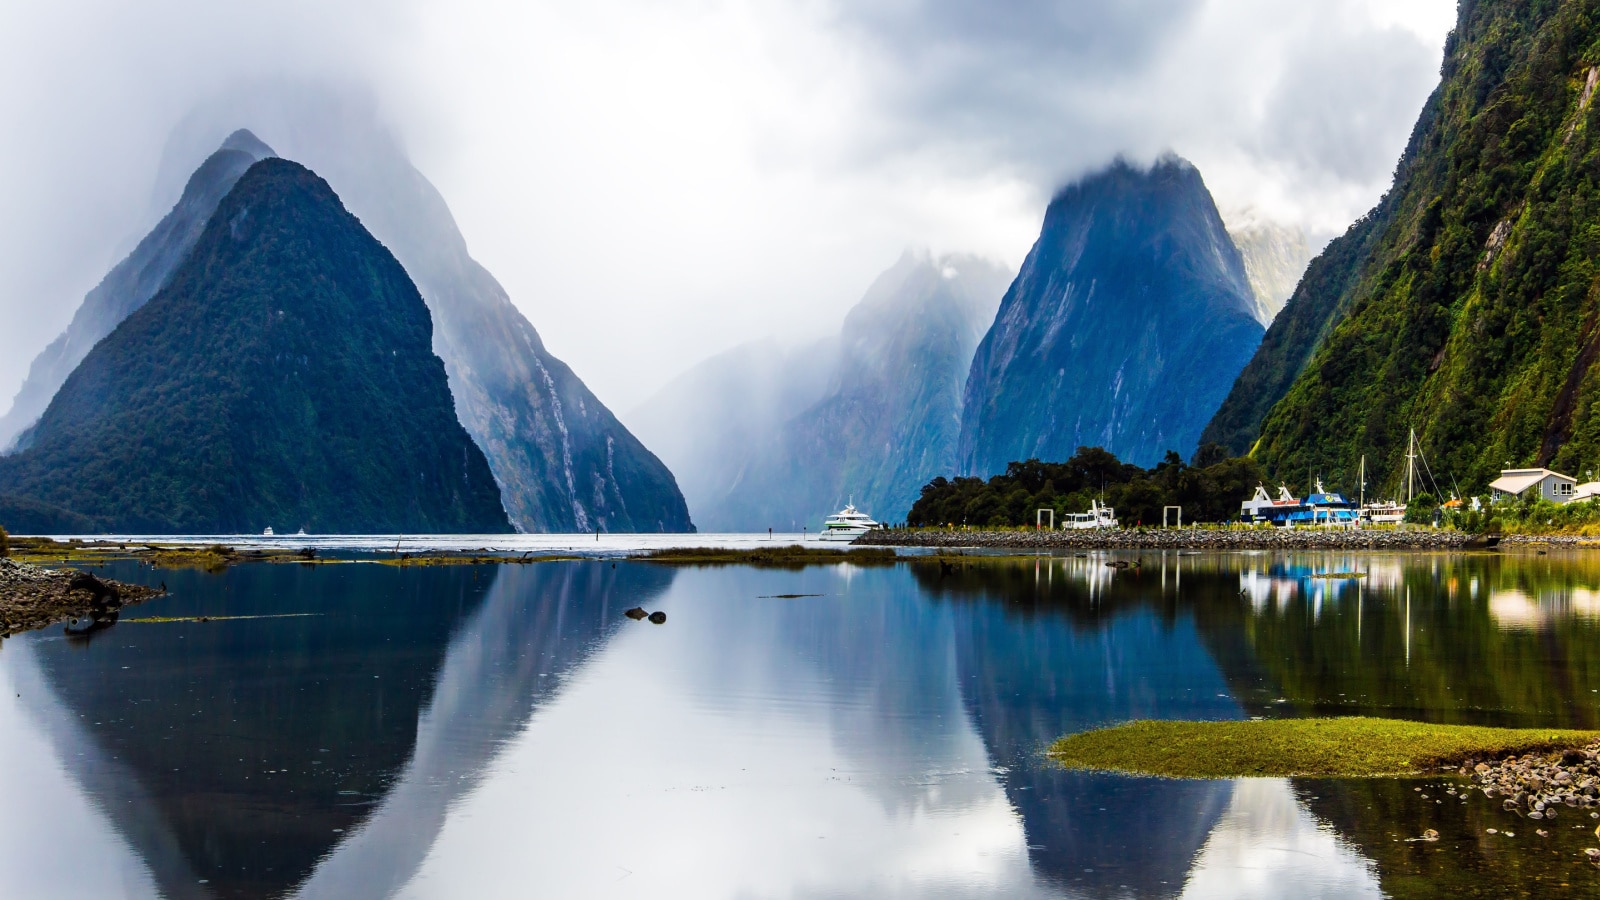 Land of hobbits - New Zealand. Port of tourist and pleasure ships, yachts and boats. Storm clouds cover the sky over the ocean fjord Milford Sound. Concept of exotic, photographic tourism